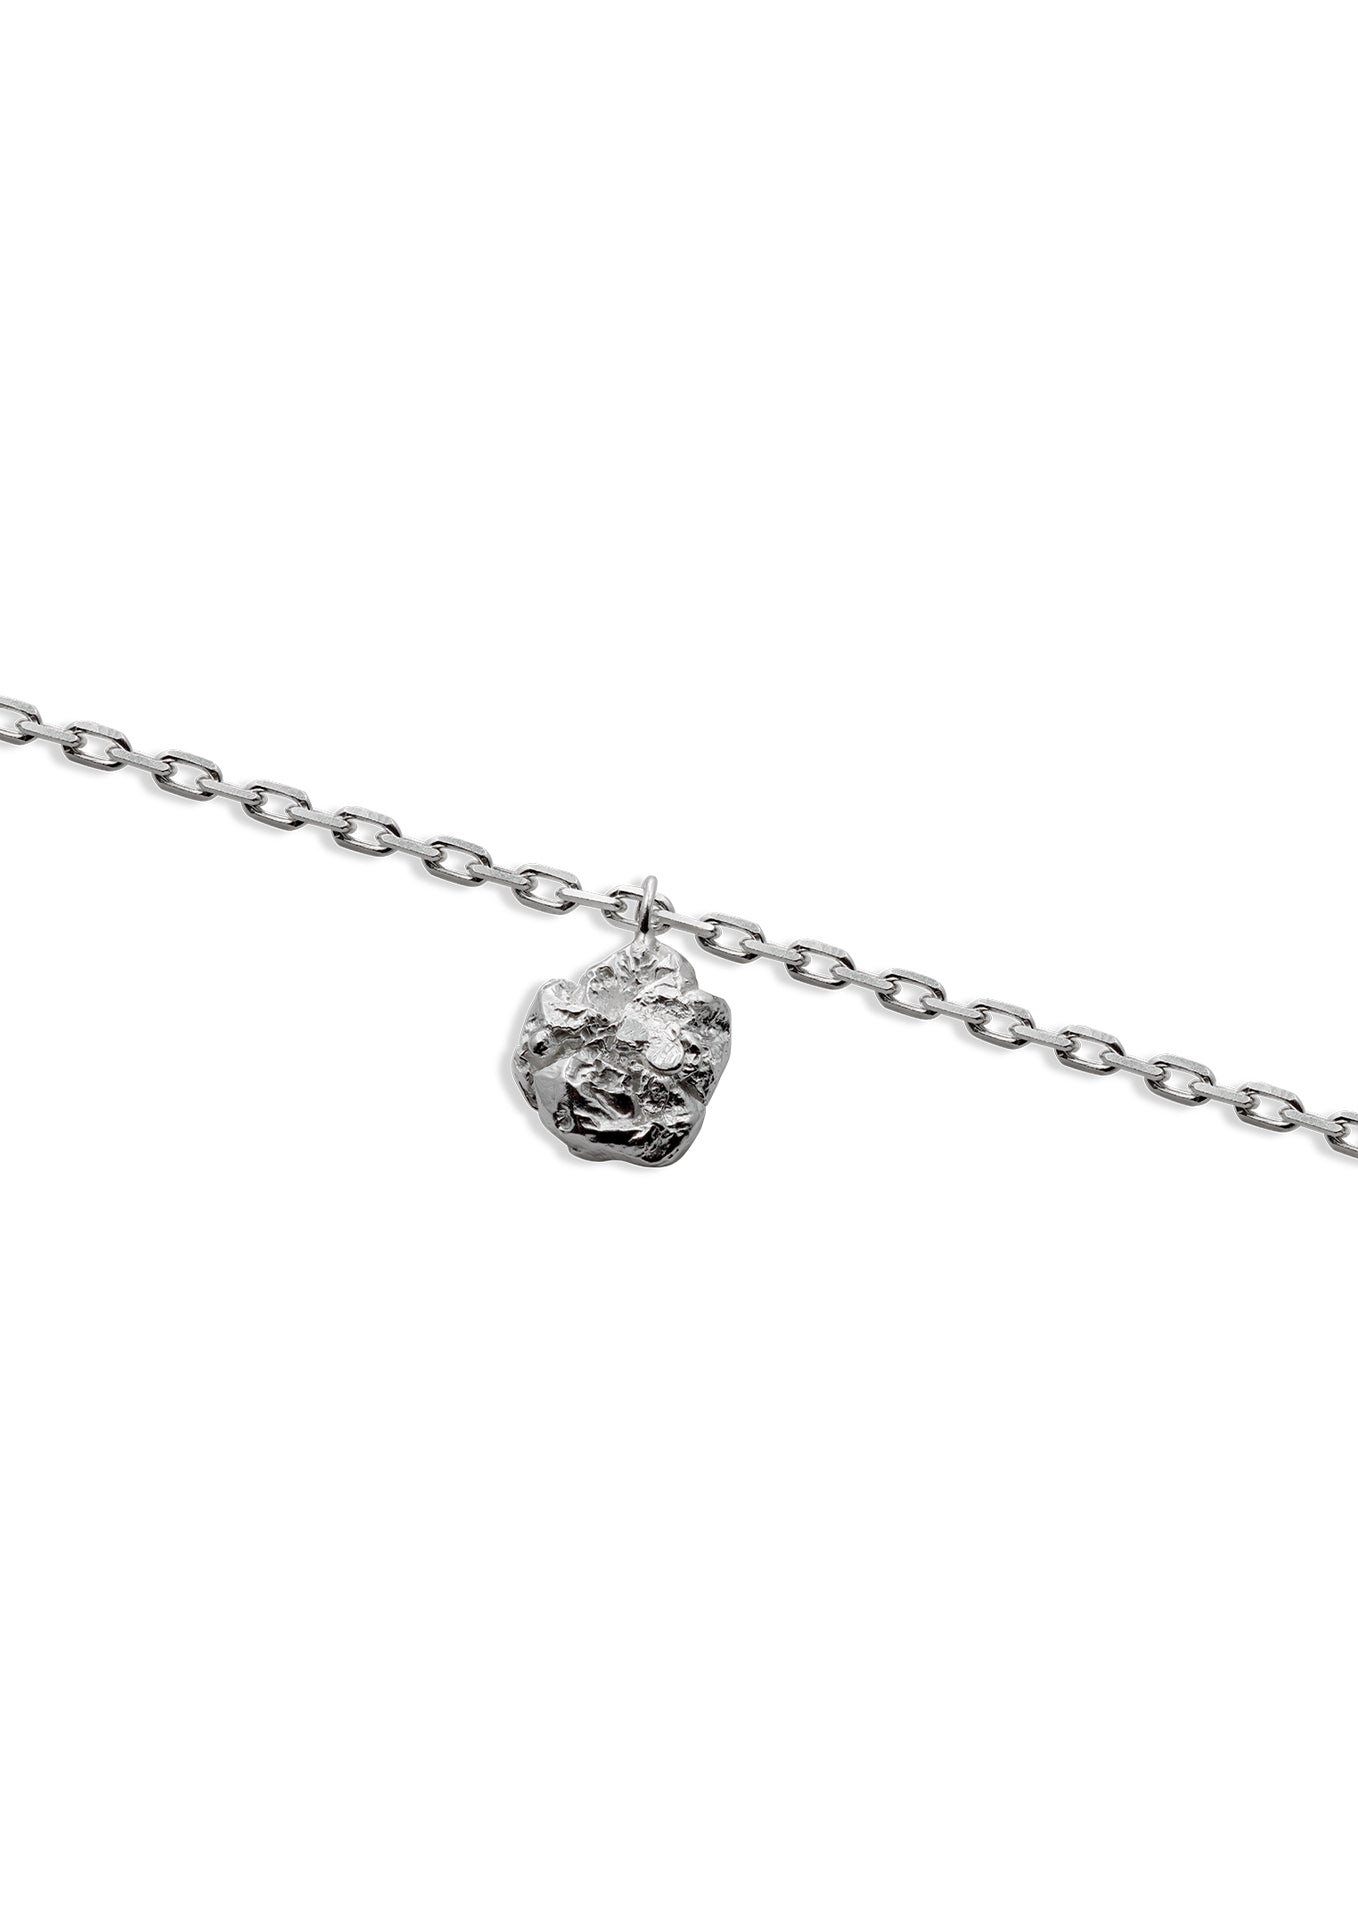 NO MORE accessories Raw Necklace in Sterling Silver, 60 